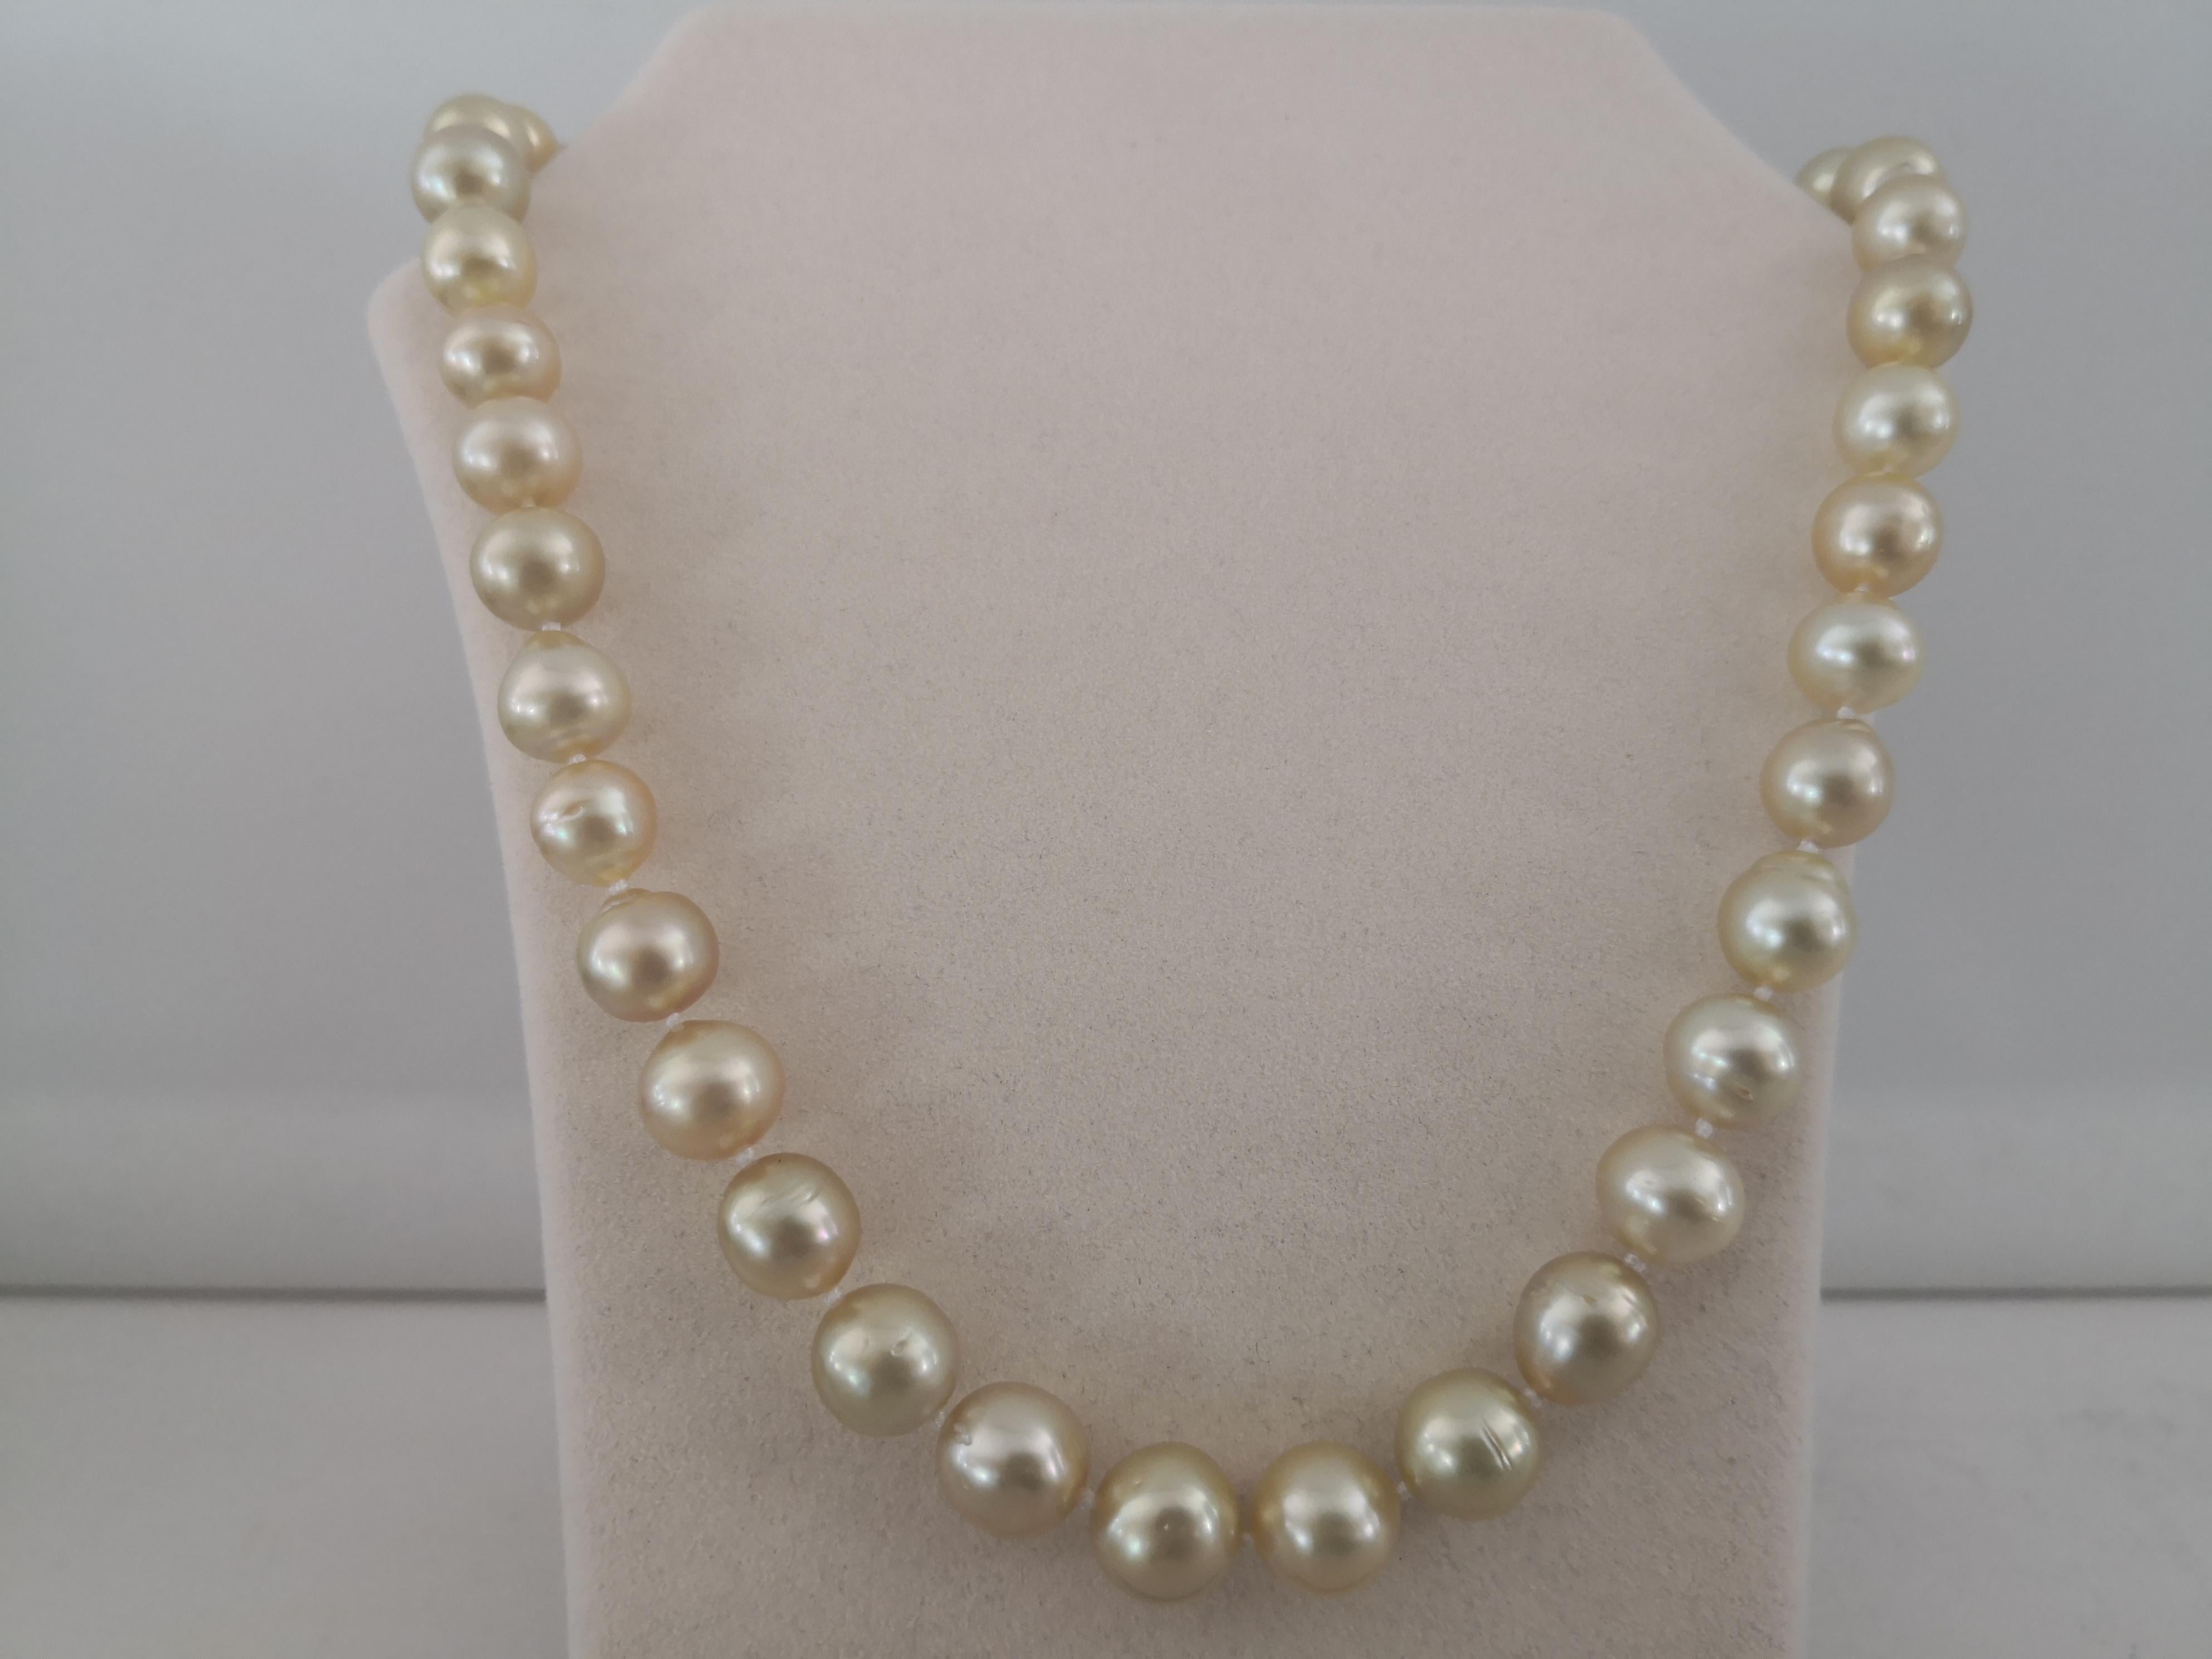 A beautiful Natural Color South Sea Pearls, Golden color from Indonesia ocean waters. 

- Size of Pearls 10-12  mm of diameter

- Pearls from Pinctada Maxima Oyster

- Origin: Indonesia ocean waters

- Natural deep  golden color and greeny overtones